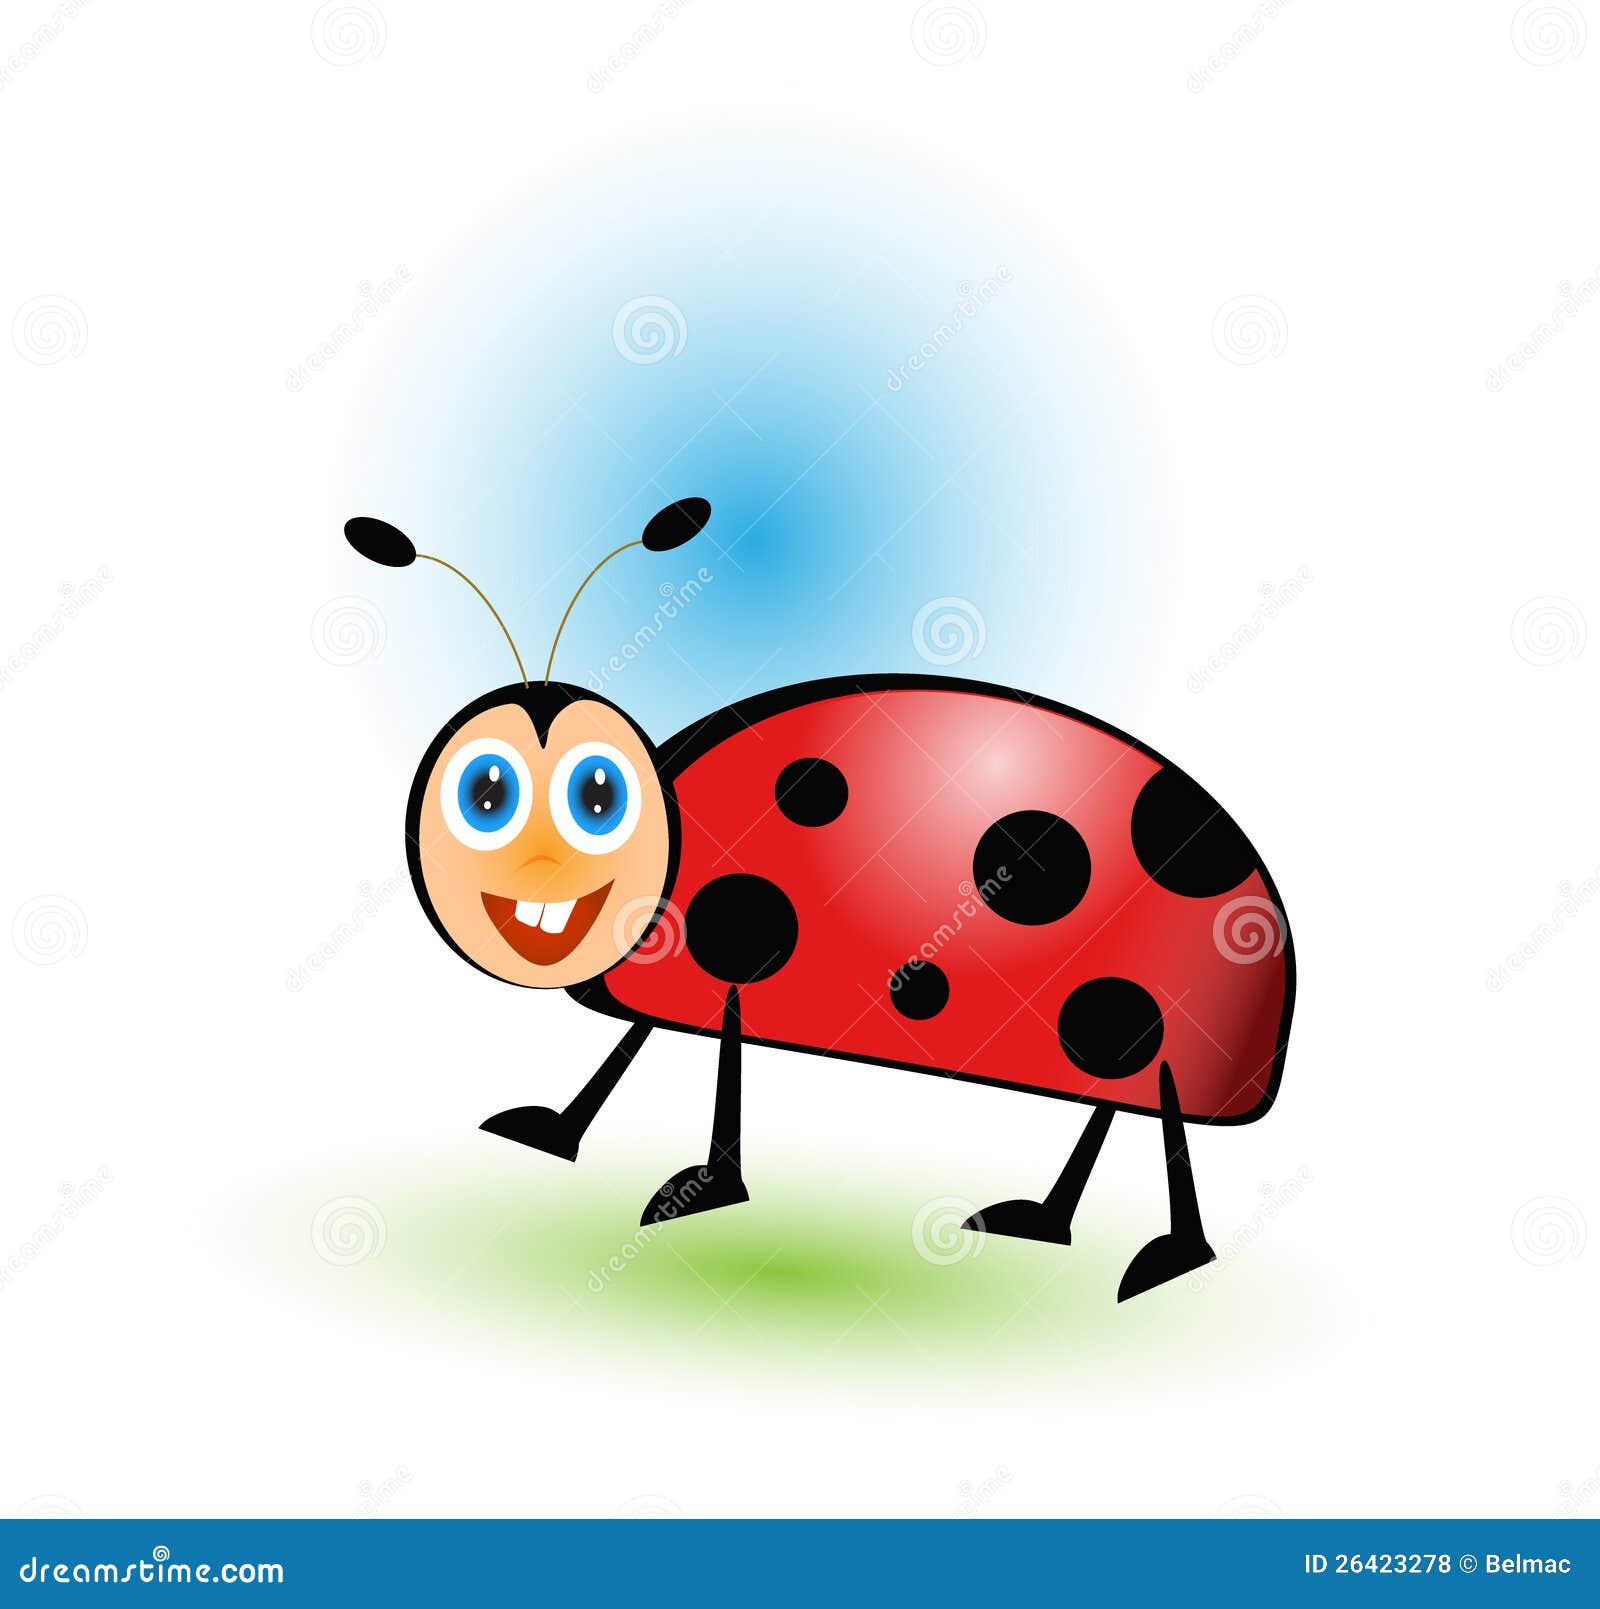 Cute ladybug cartoon stock vector. Illustration of insect - 26423278